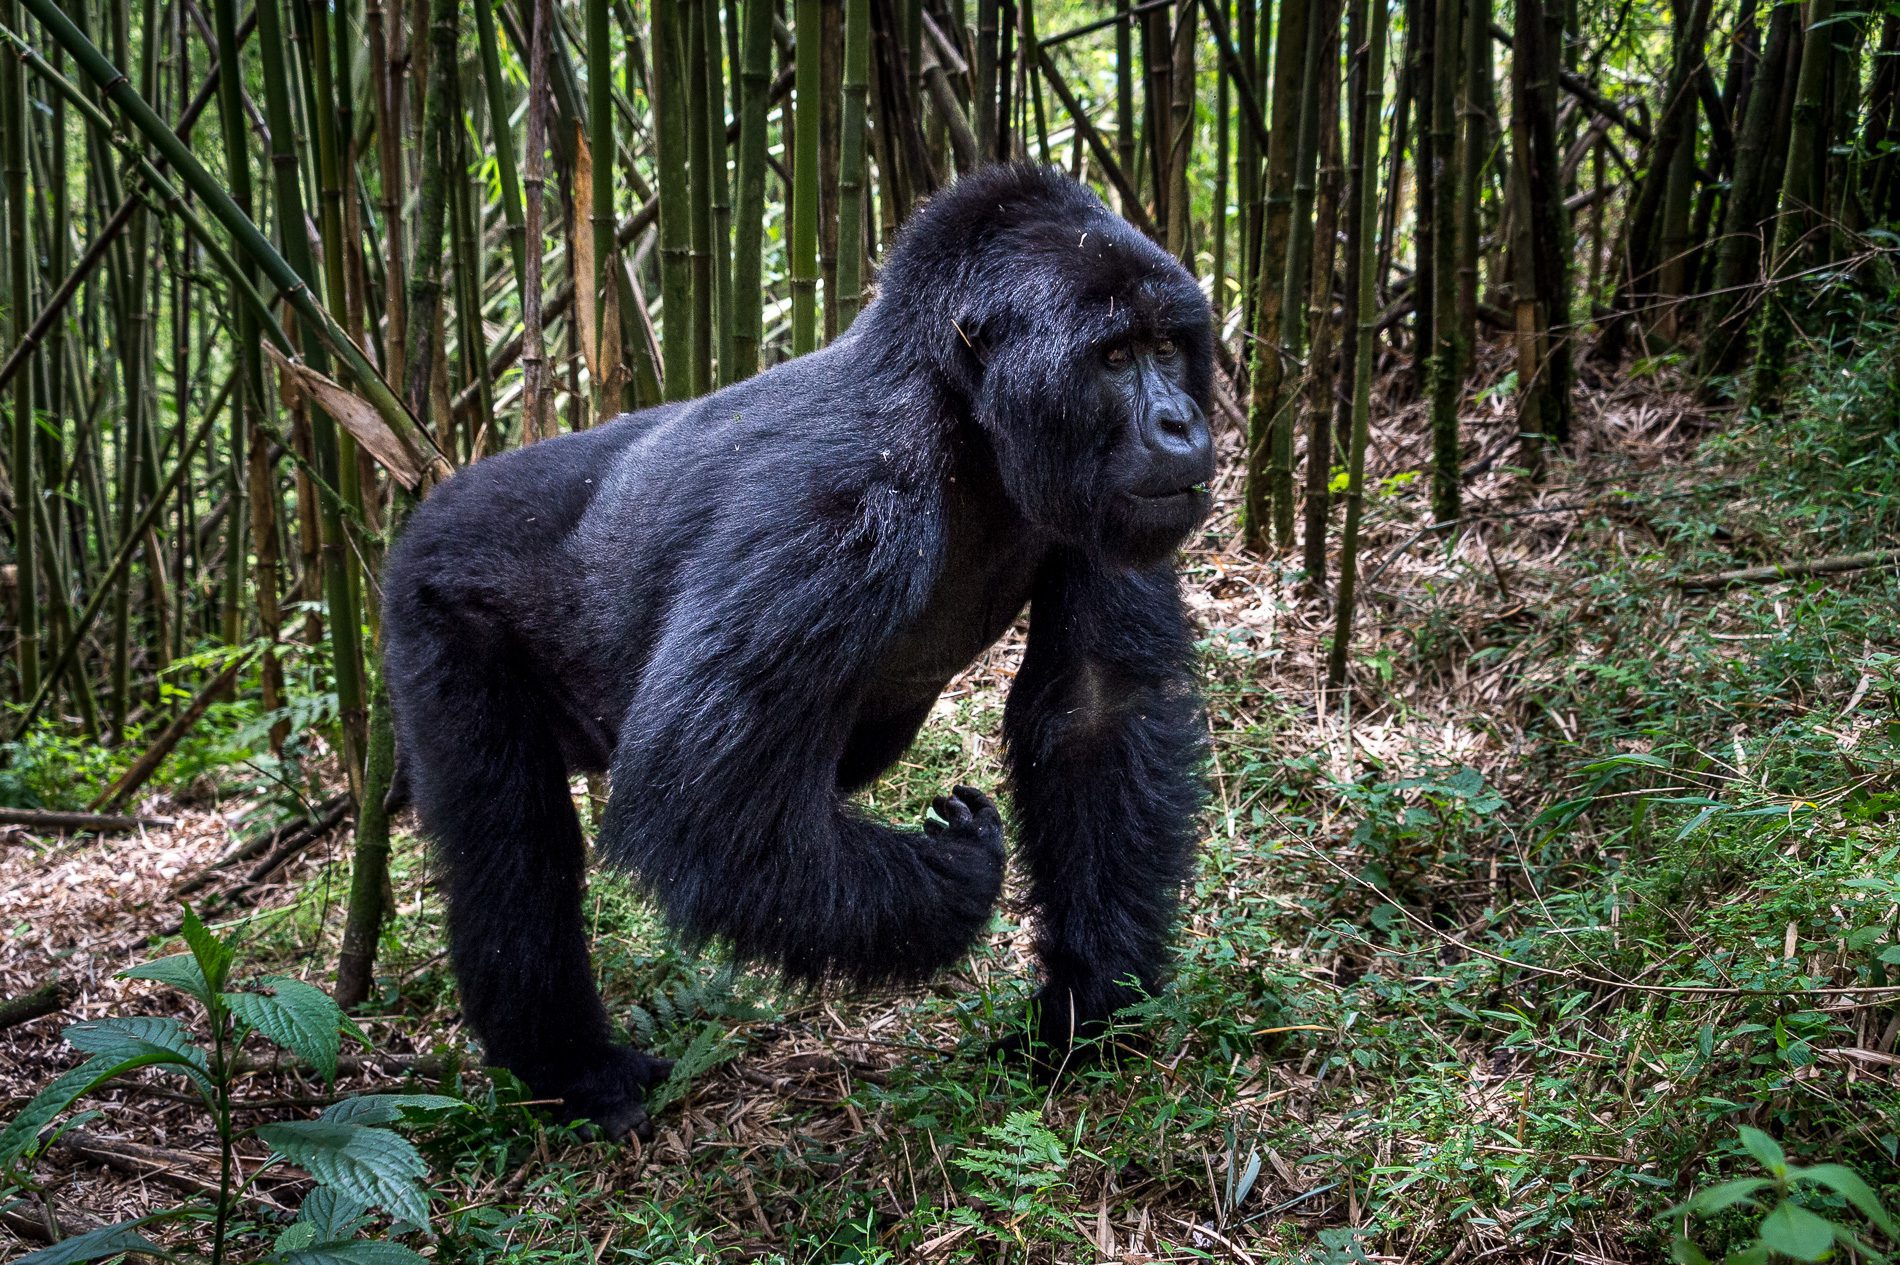 Large gorilla walking through the forest with one hand lifted seen while gorilla trekking on Rwanda East Africa safari